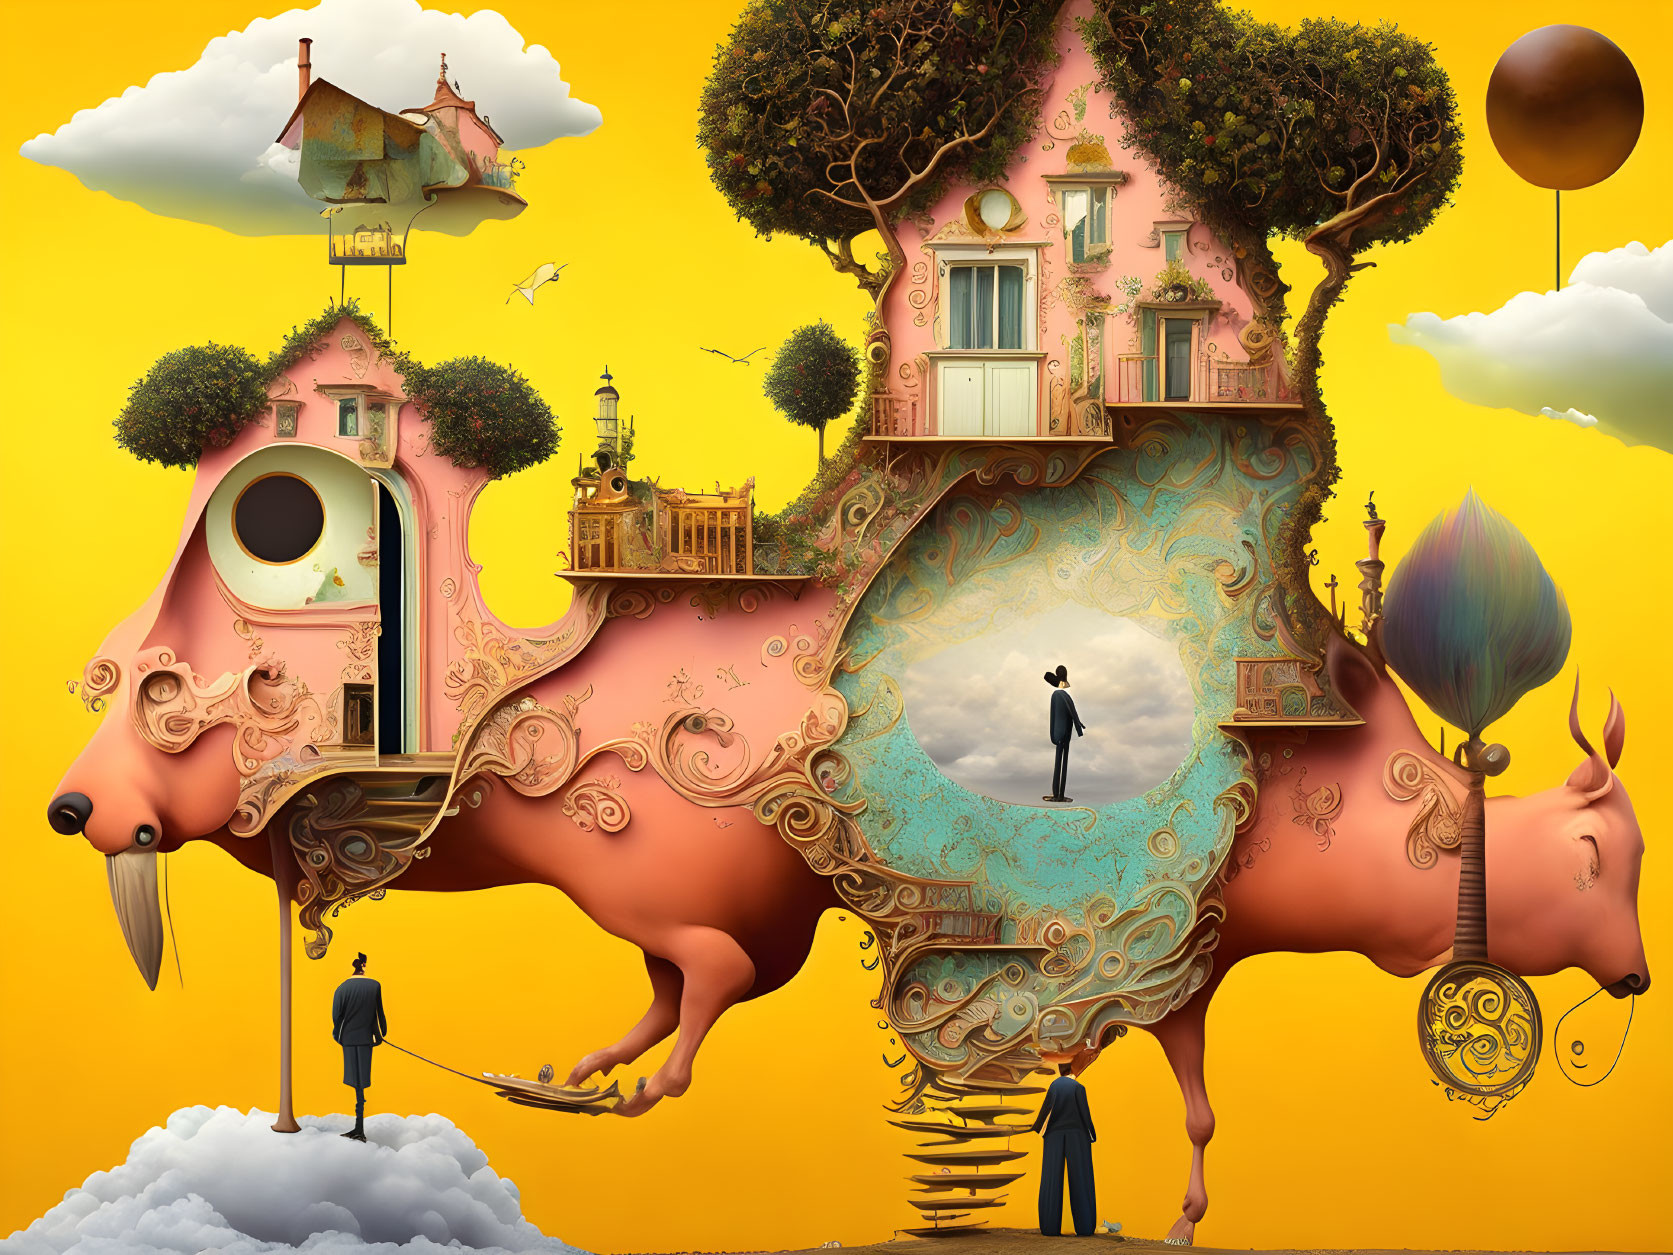 Surreal golden illustration with flying house, people, trees, balloon, and rhinoceros